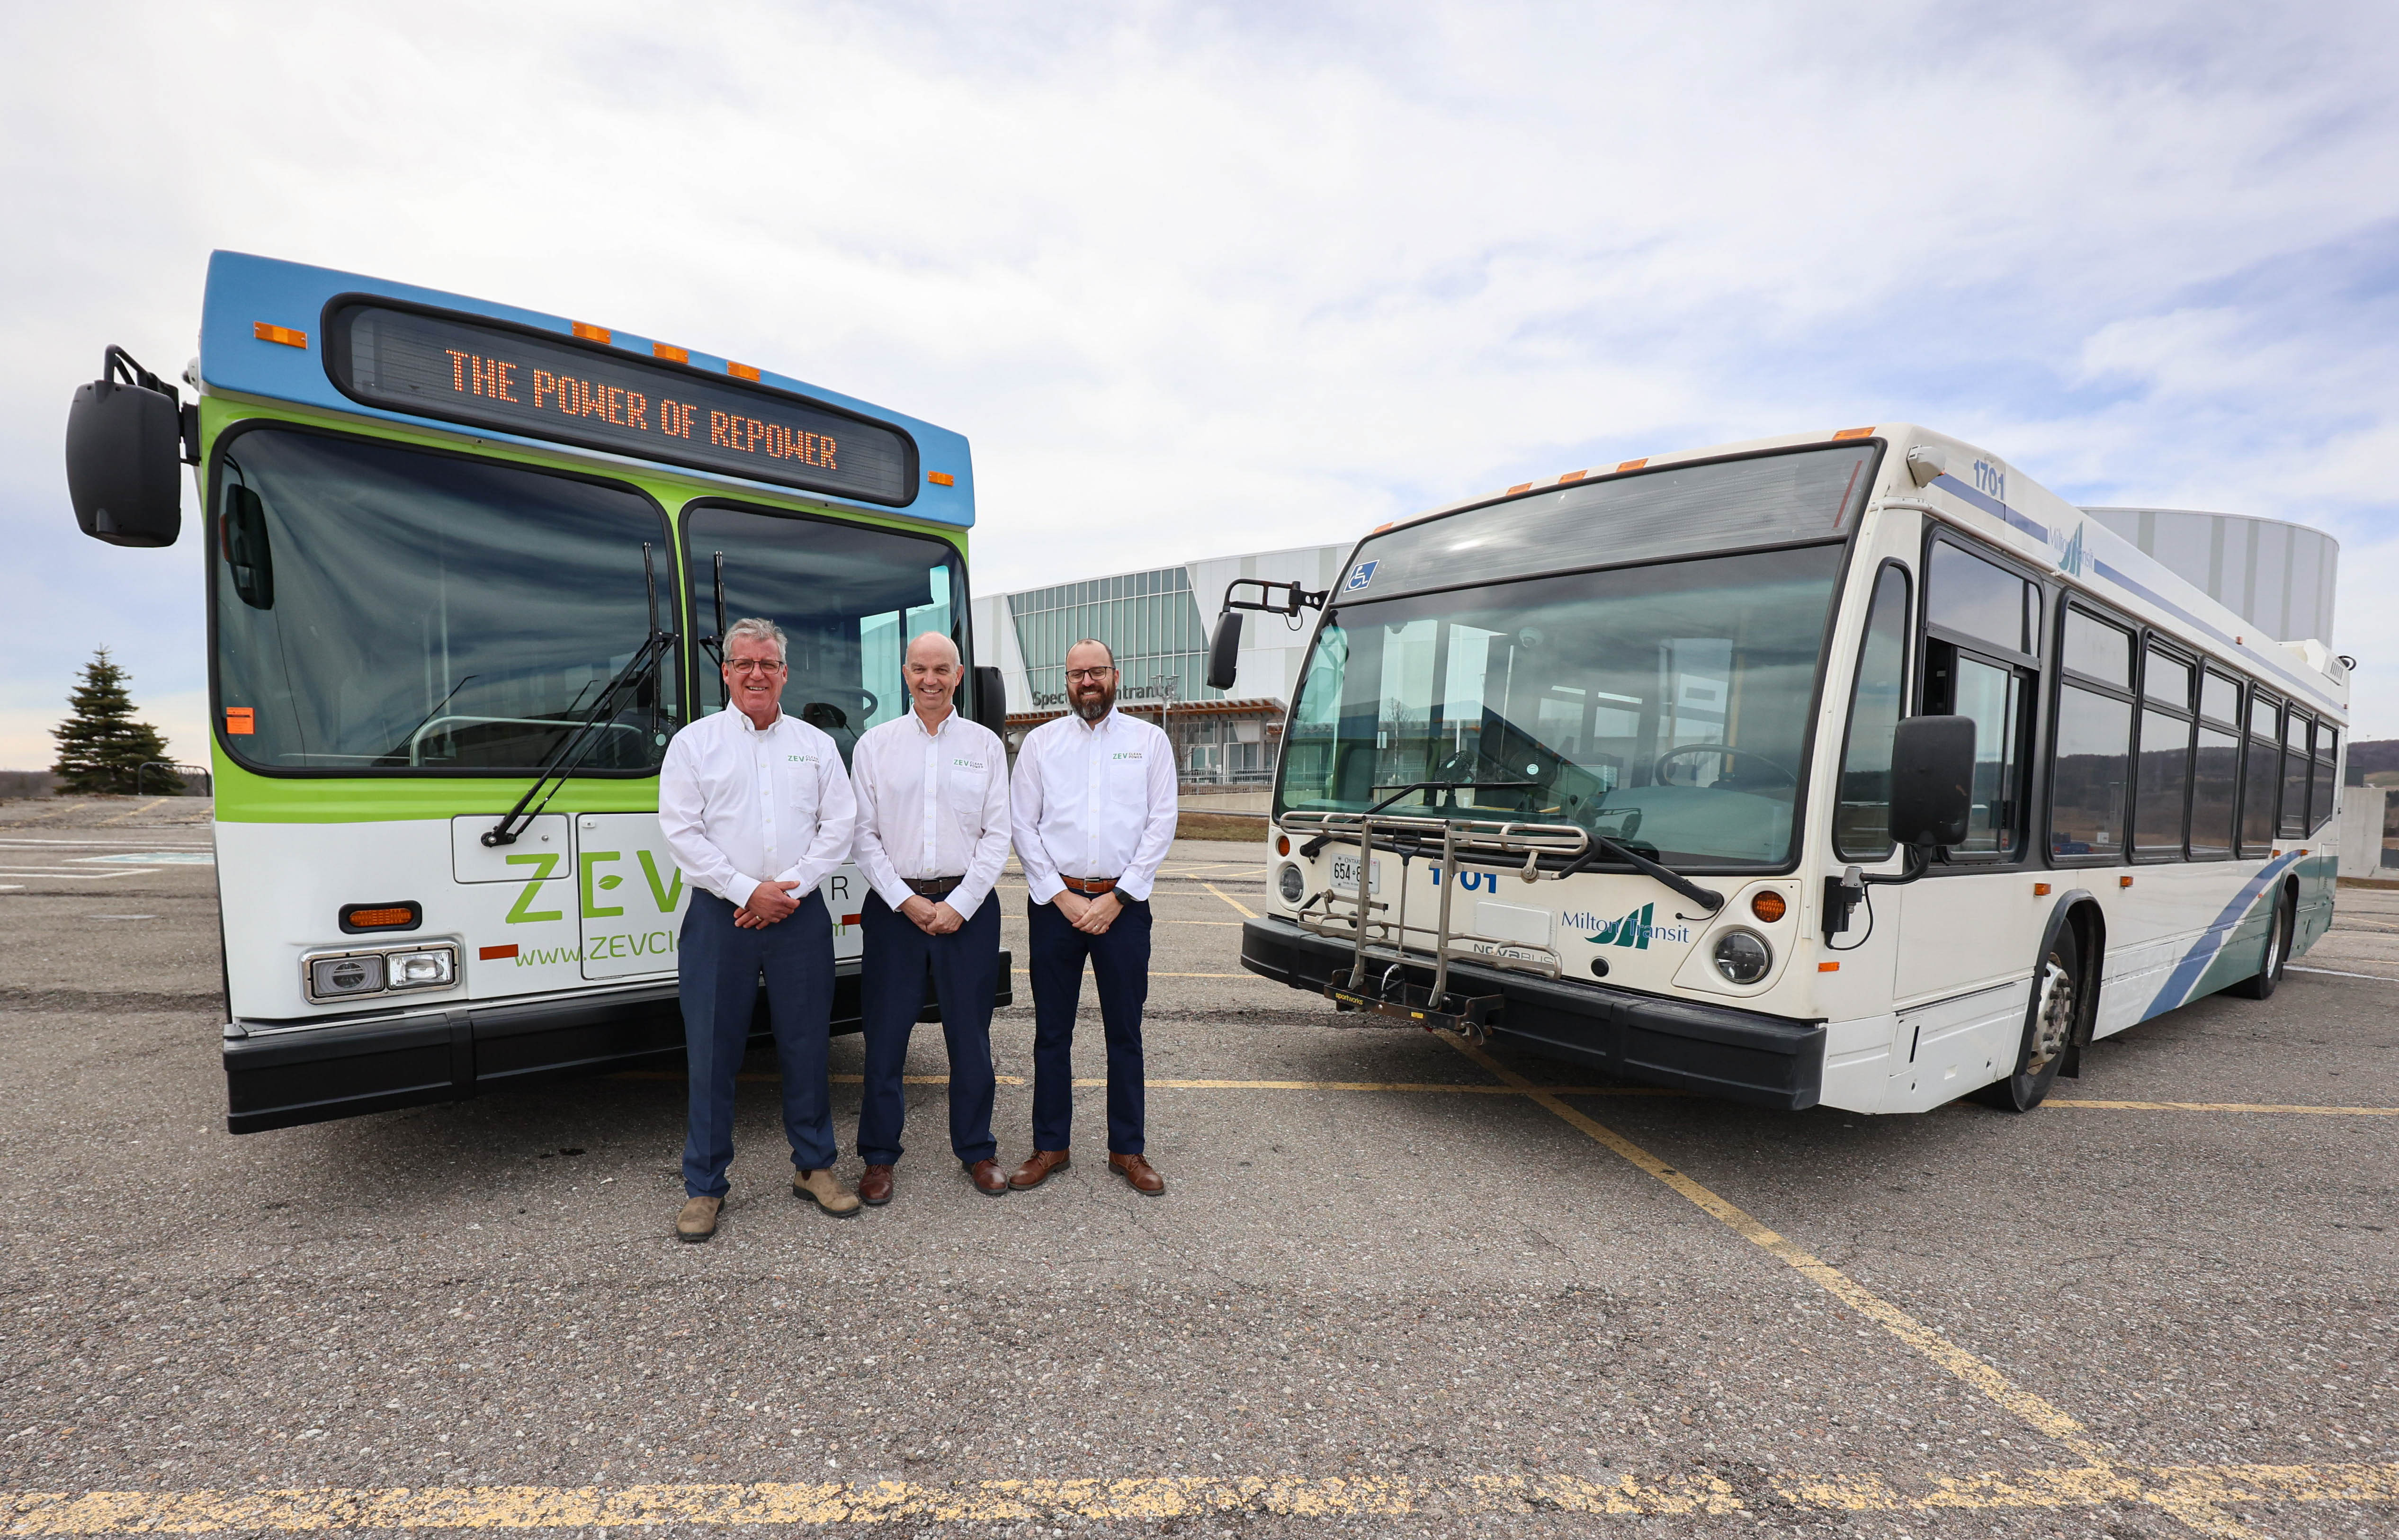 Three men standing in front of two parked buses